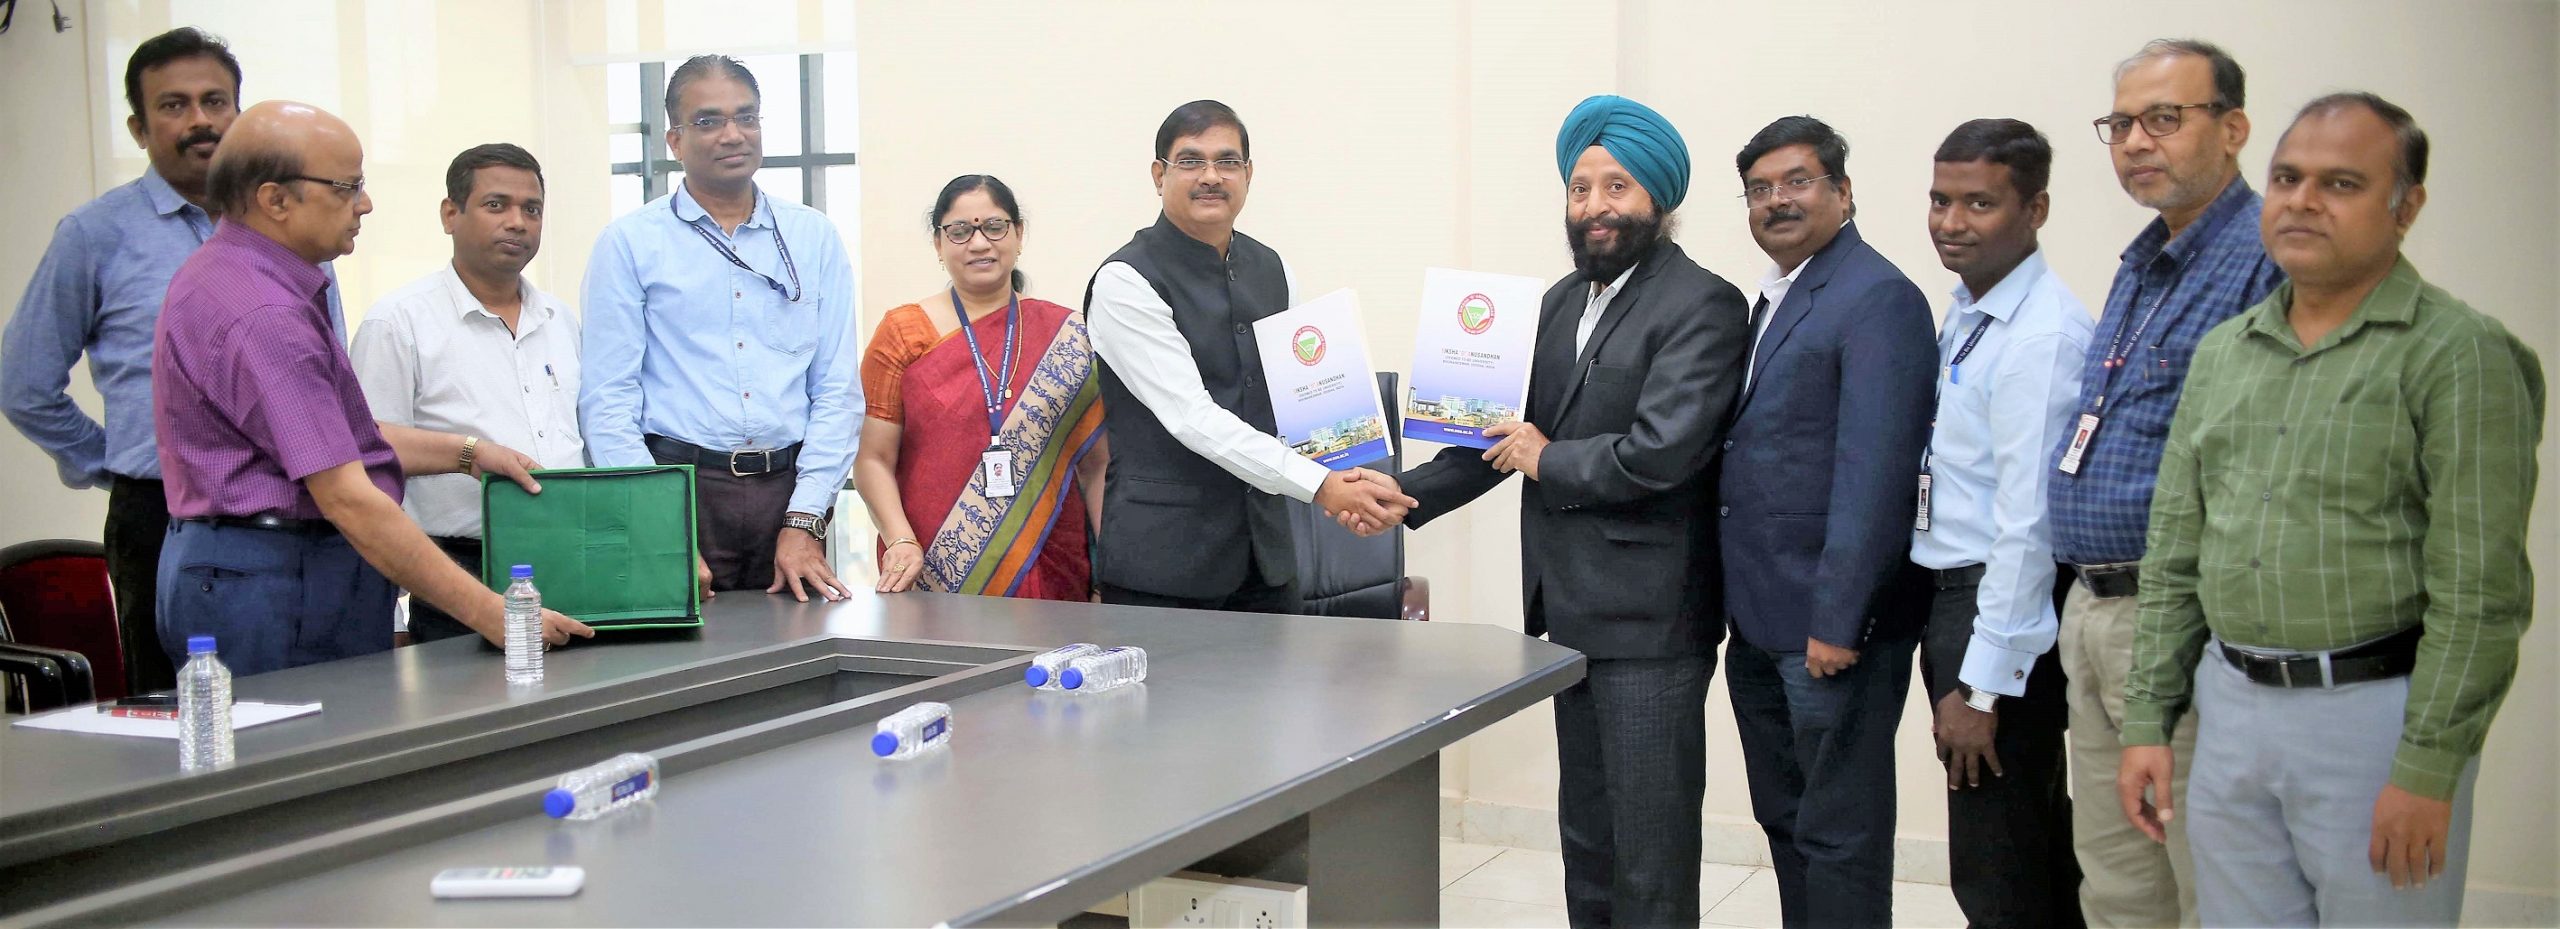 SOA SIGNS MOU WITH GMR GROUP FOR INDUSTRIAL EXPOSURE OF STUDENTS AND FACULTY